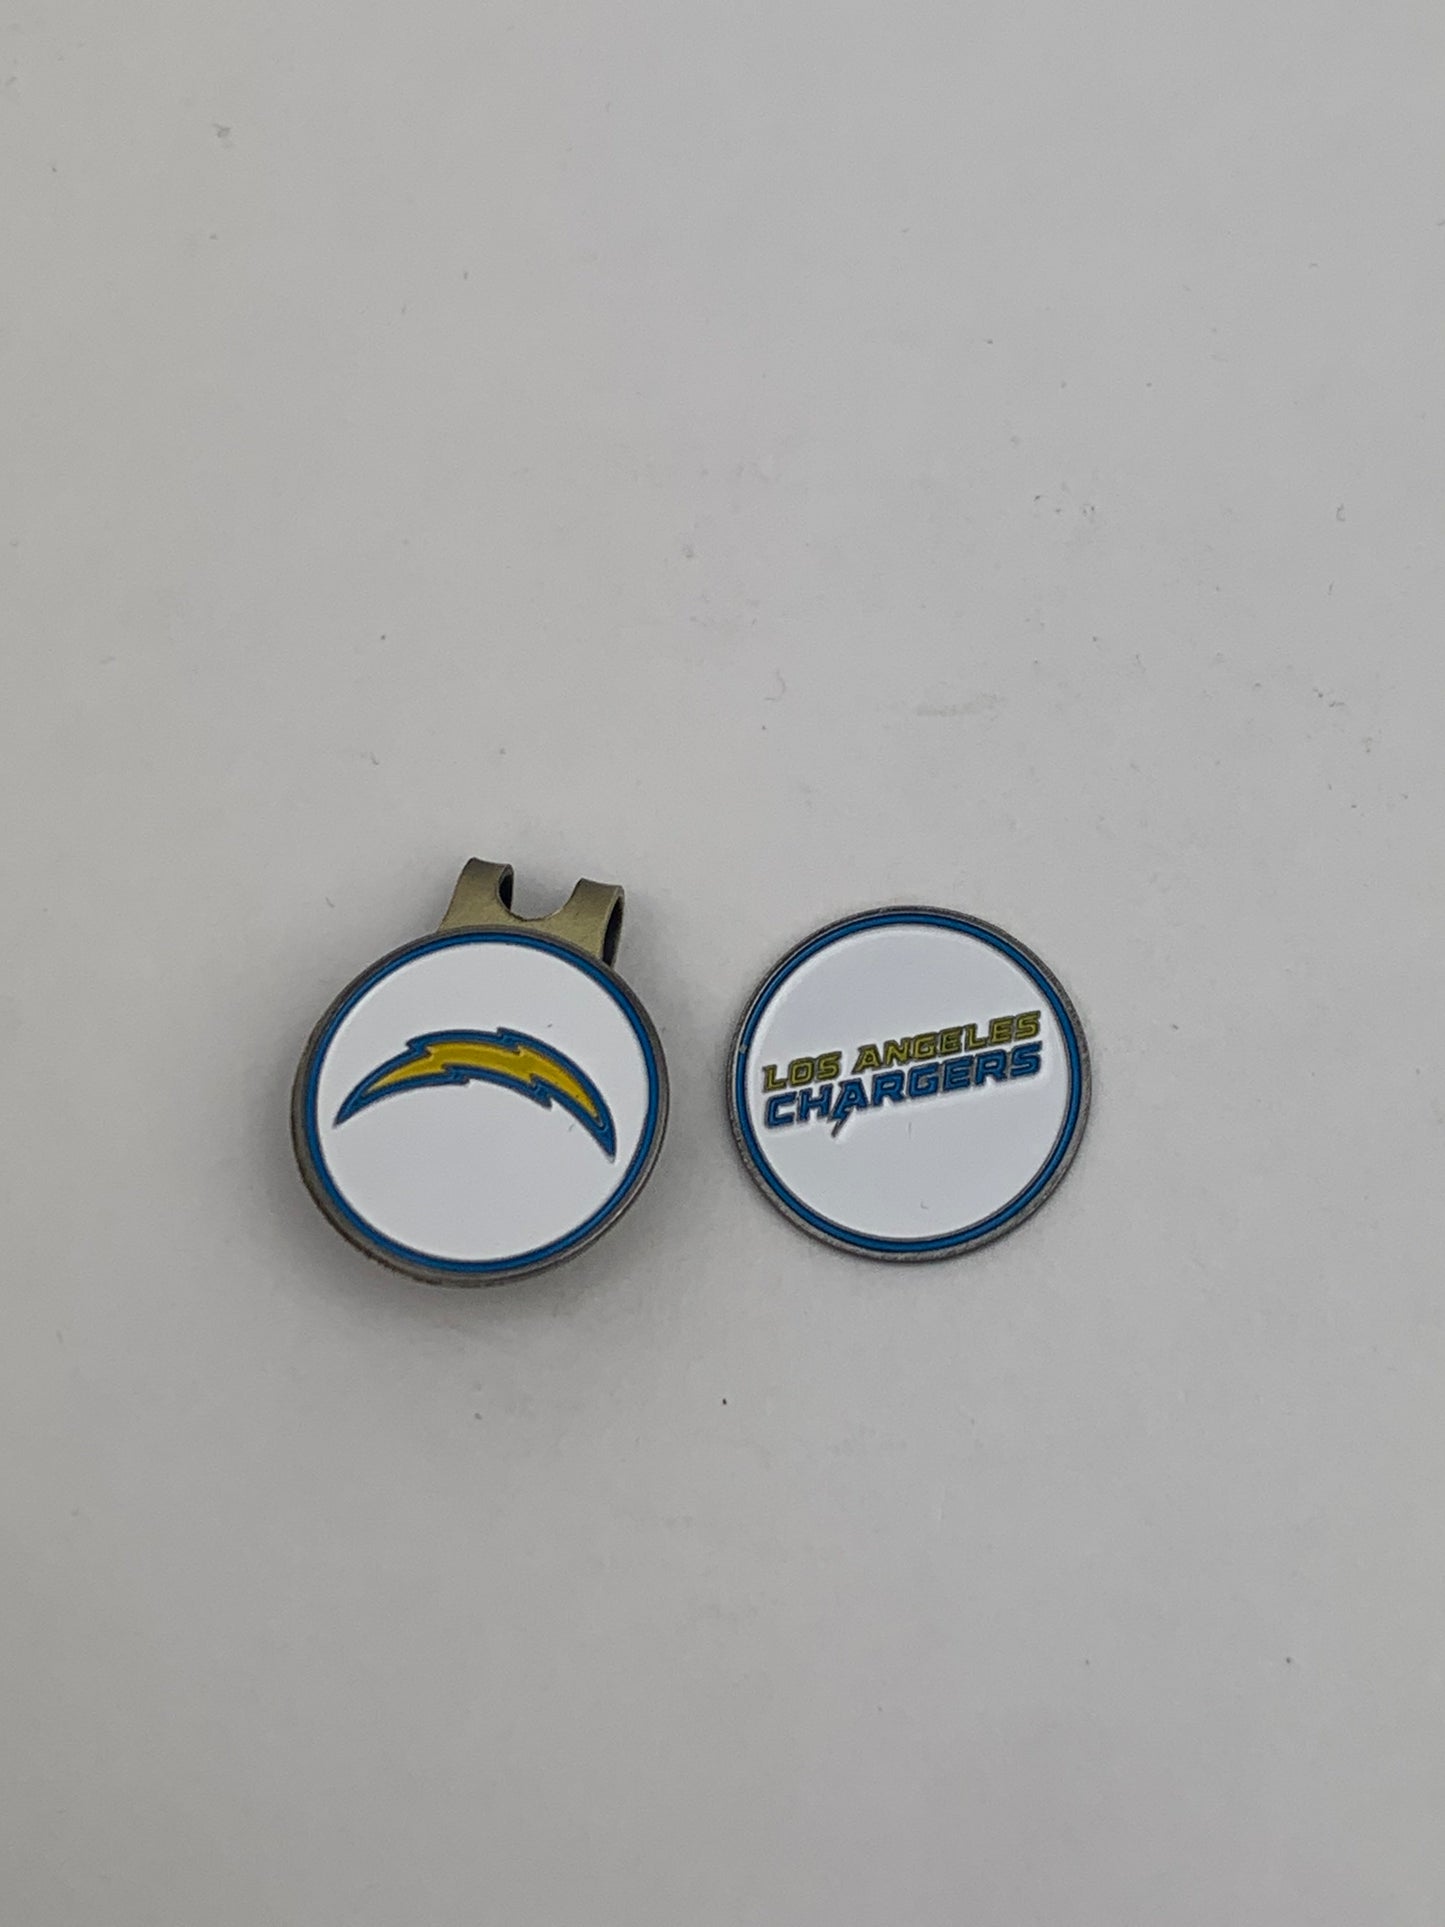 Stainless Steel NFL Unique Golf Ball Markers with Hat Clip (Los Angeles Chargers)